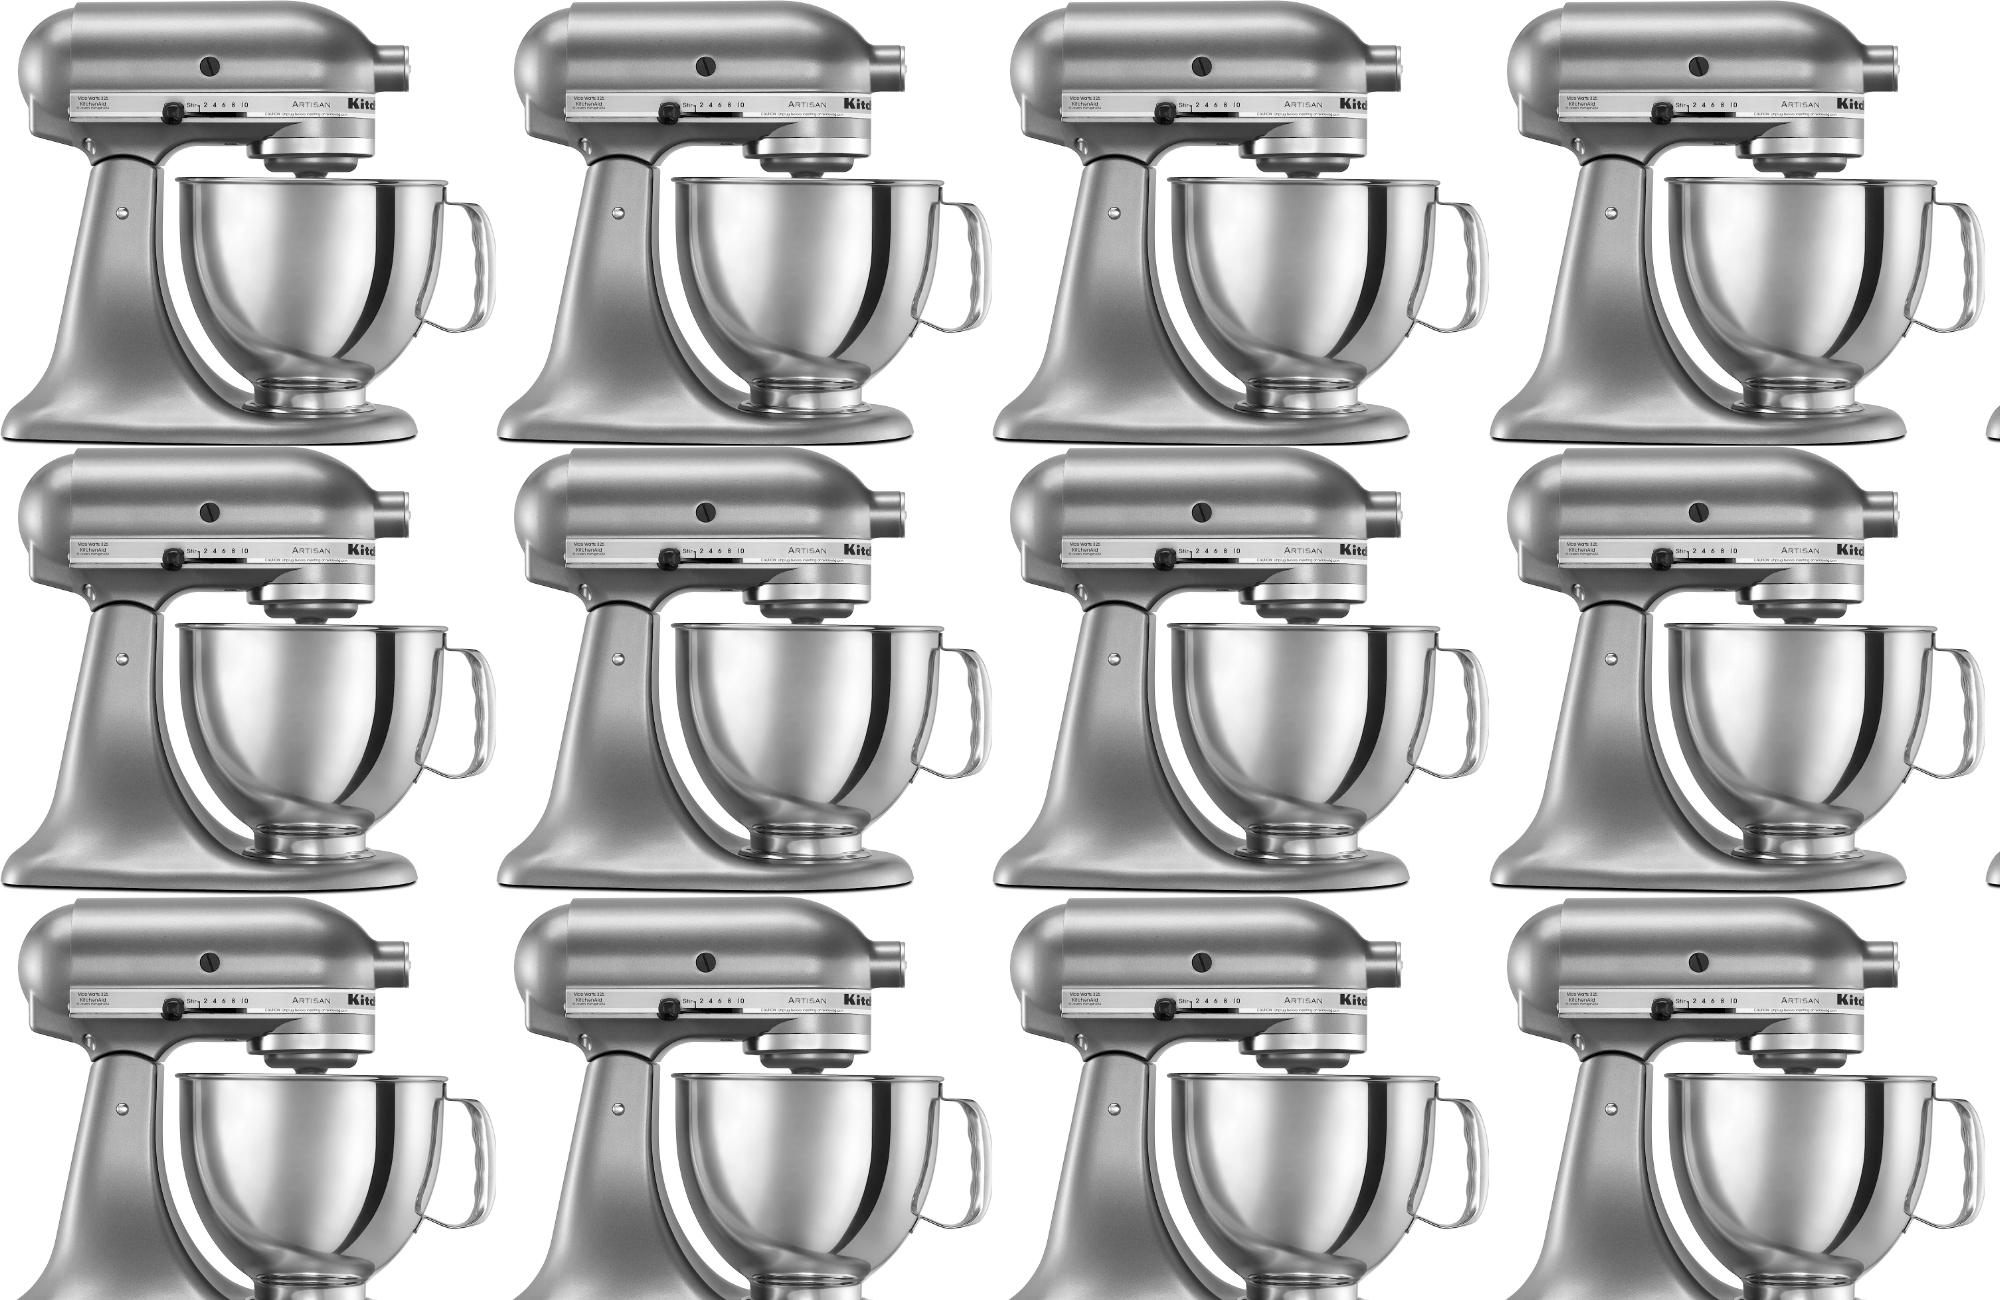 Save on KitchenAid stand mixers, Instant Pots, and more with Black